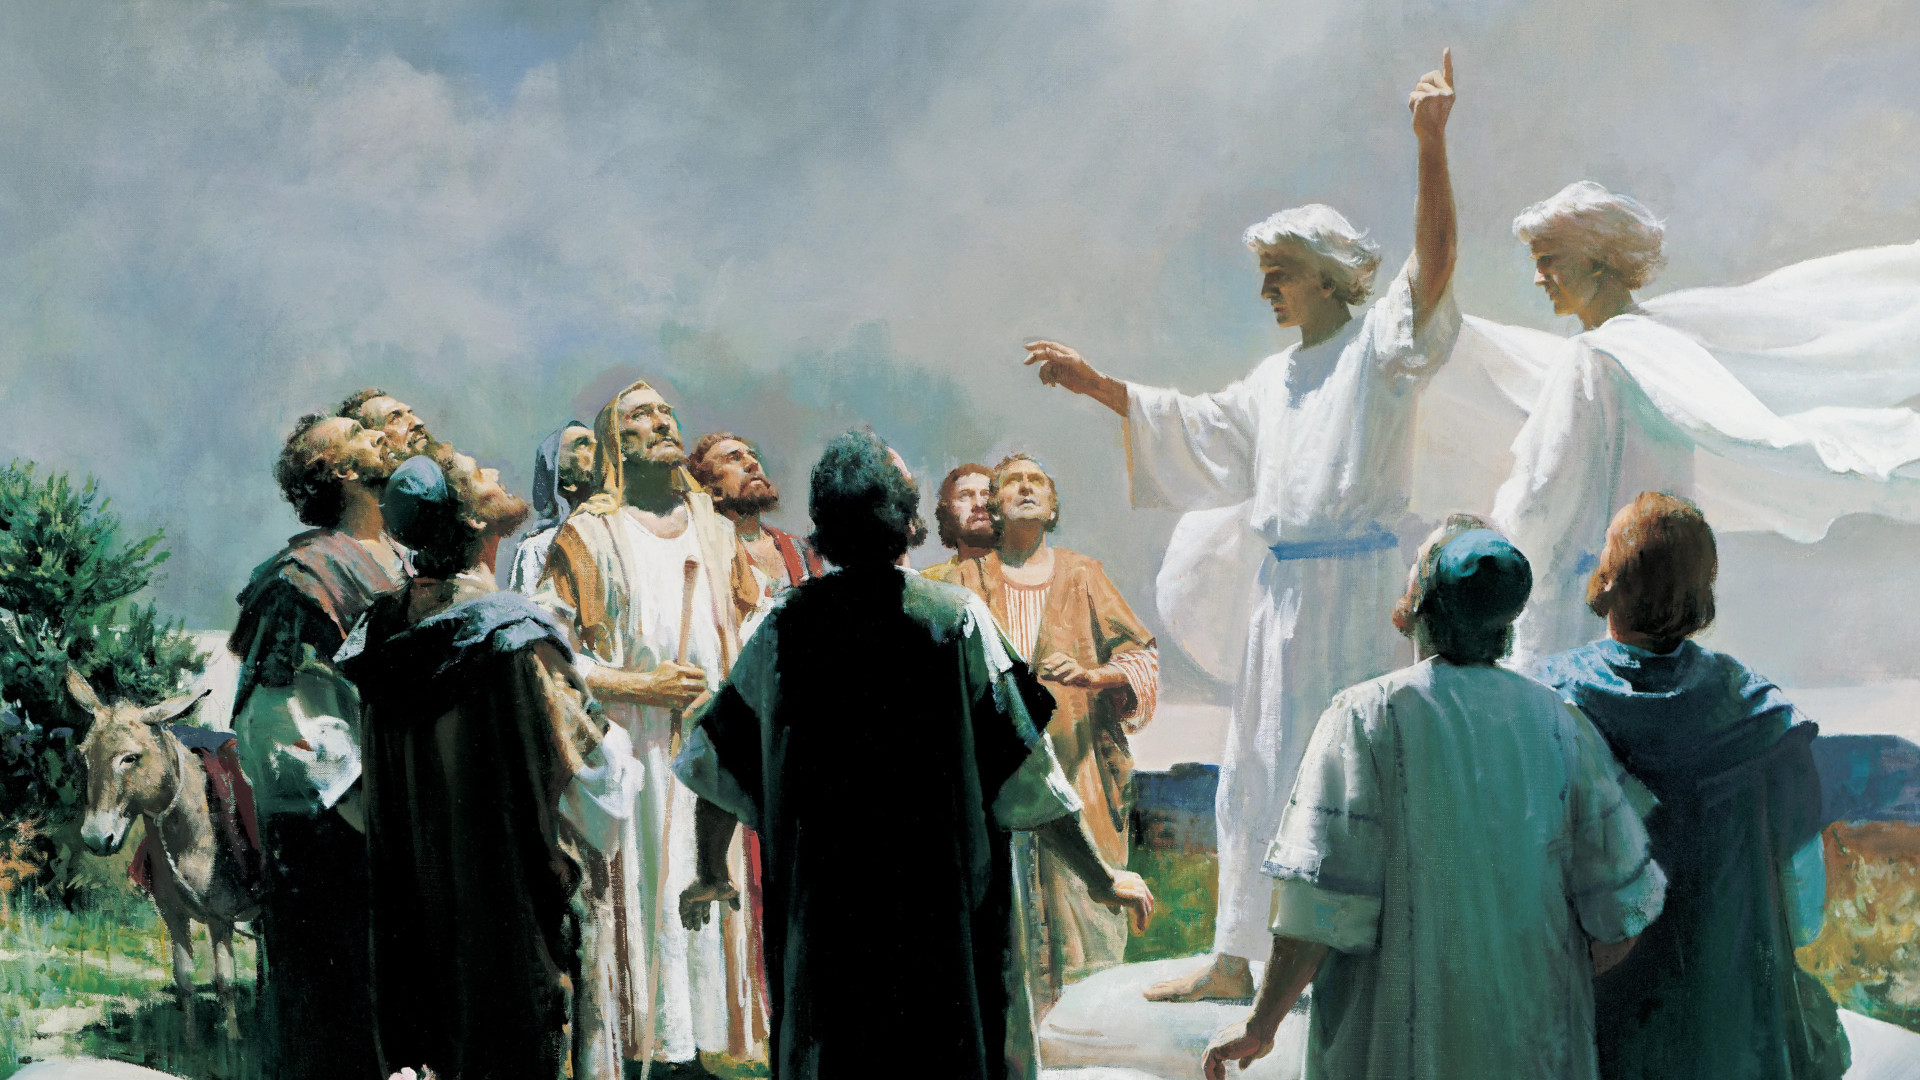 Detail from “The Ascension of Jesus” by Harry Anderson.